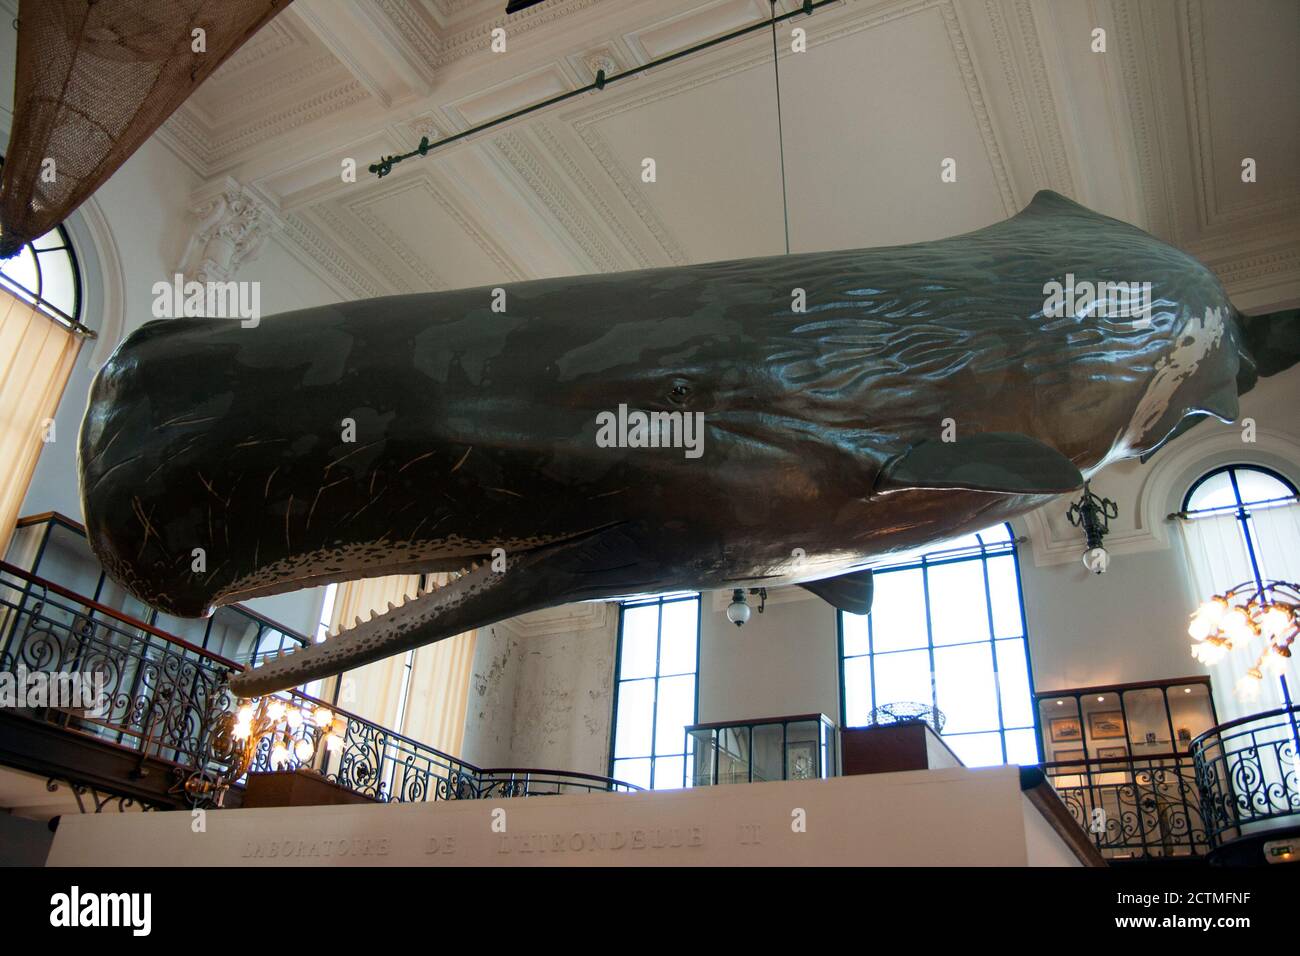 Monaco Oceanographic Museum  Flying whale. A mockup of a sperm whale.  Physeter macrocephalus or cachalot is the largest of the toothed whales. Stock Photo